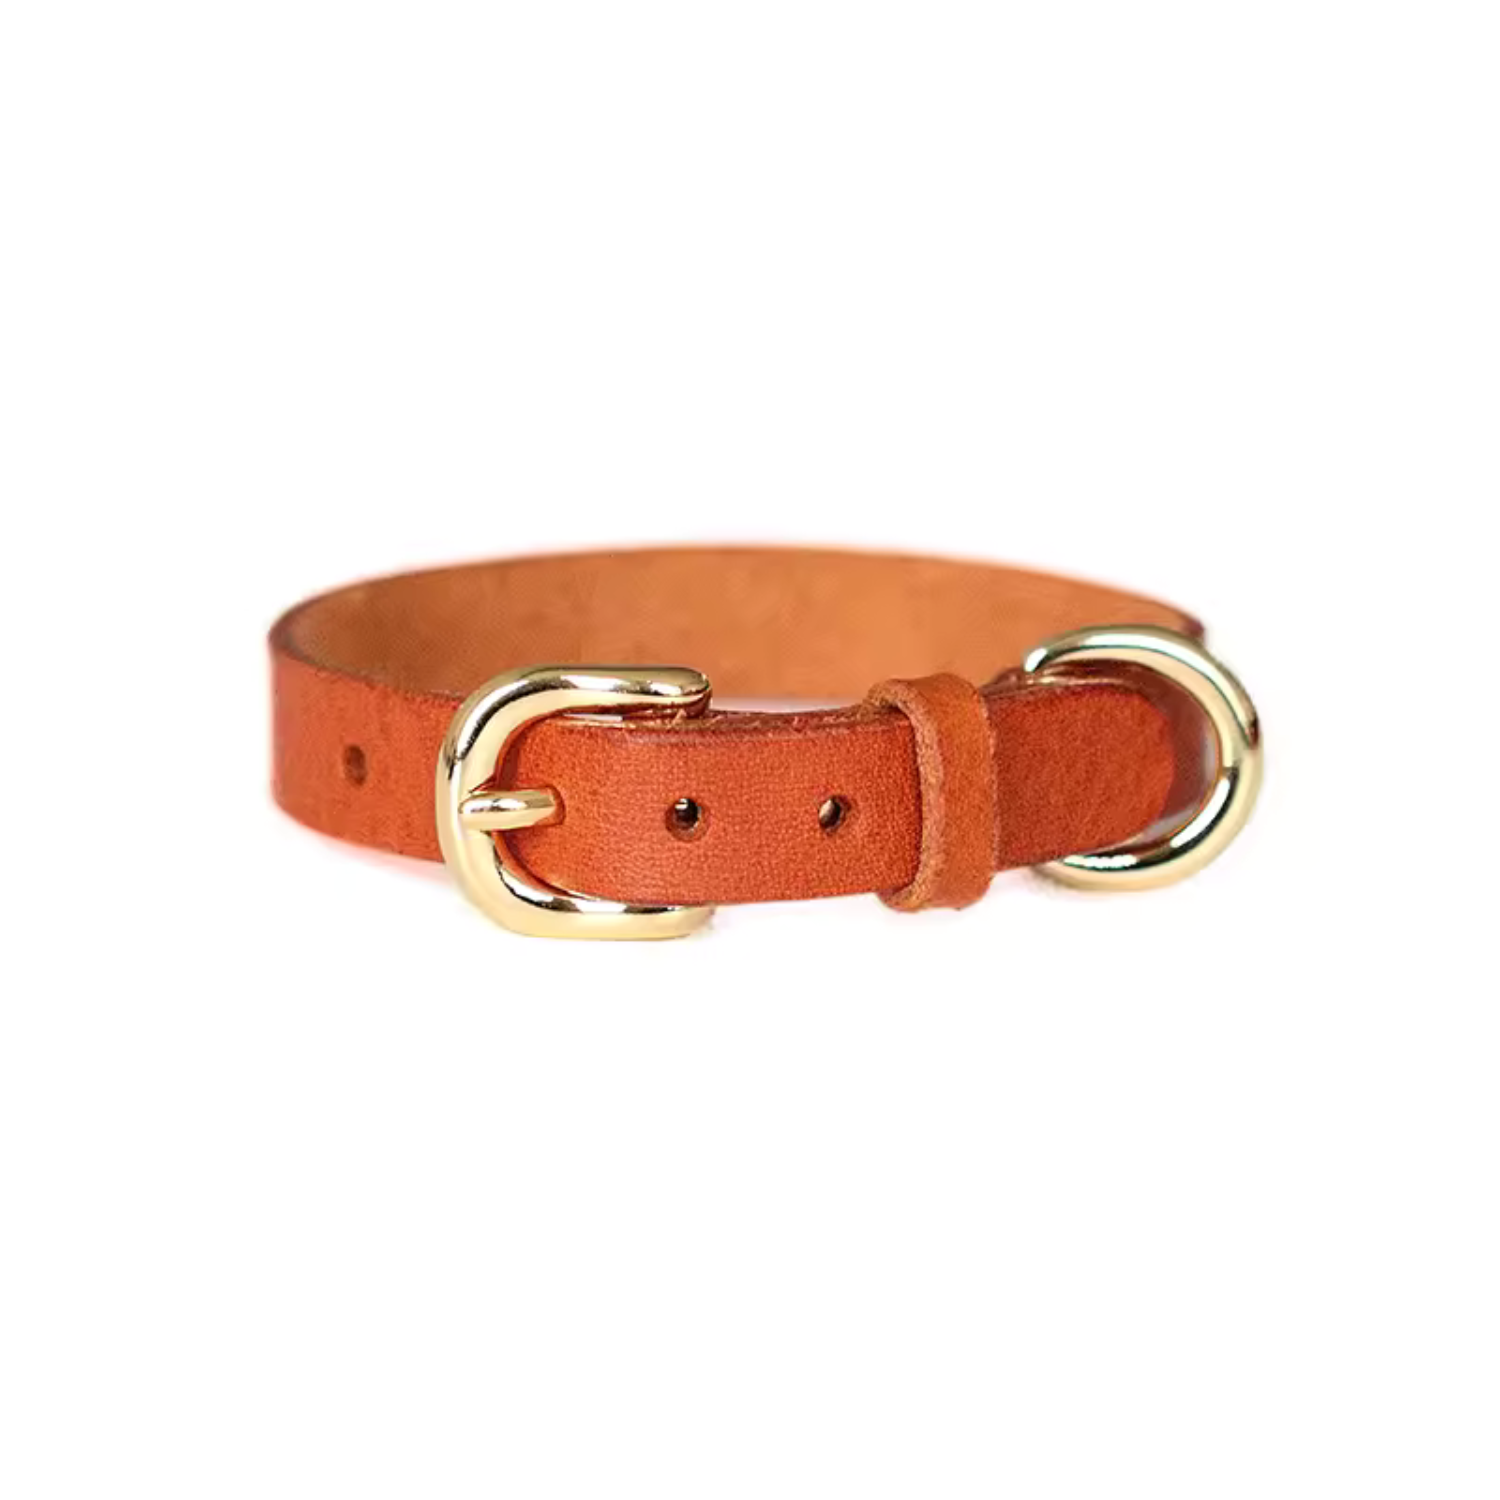 Brown Smooth Calfskin Leather Buckle Cat Collar with D-Shape Buckle - Premium Quality